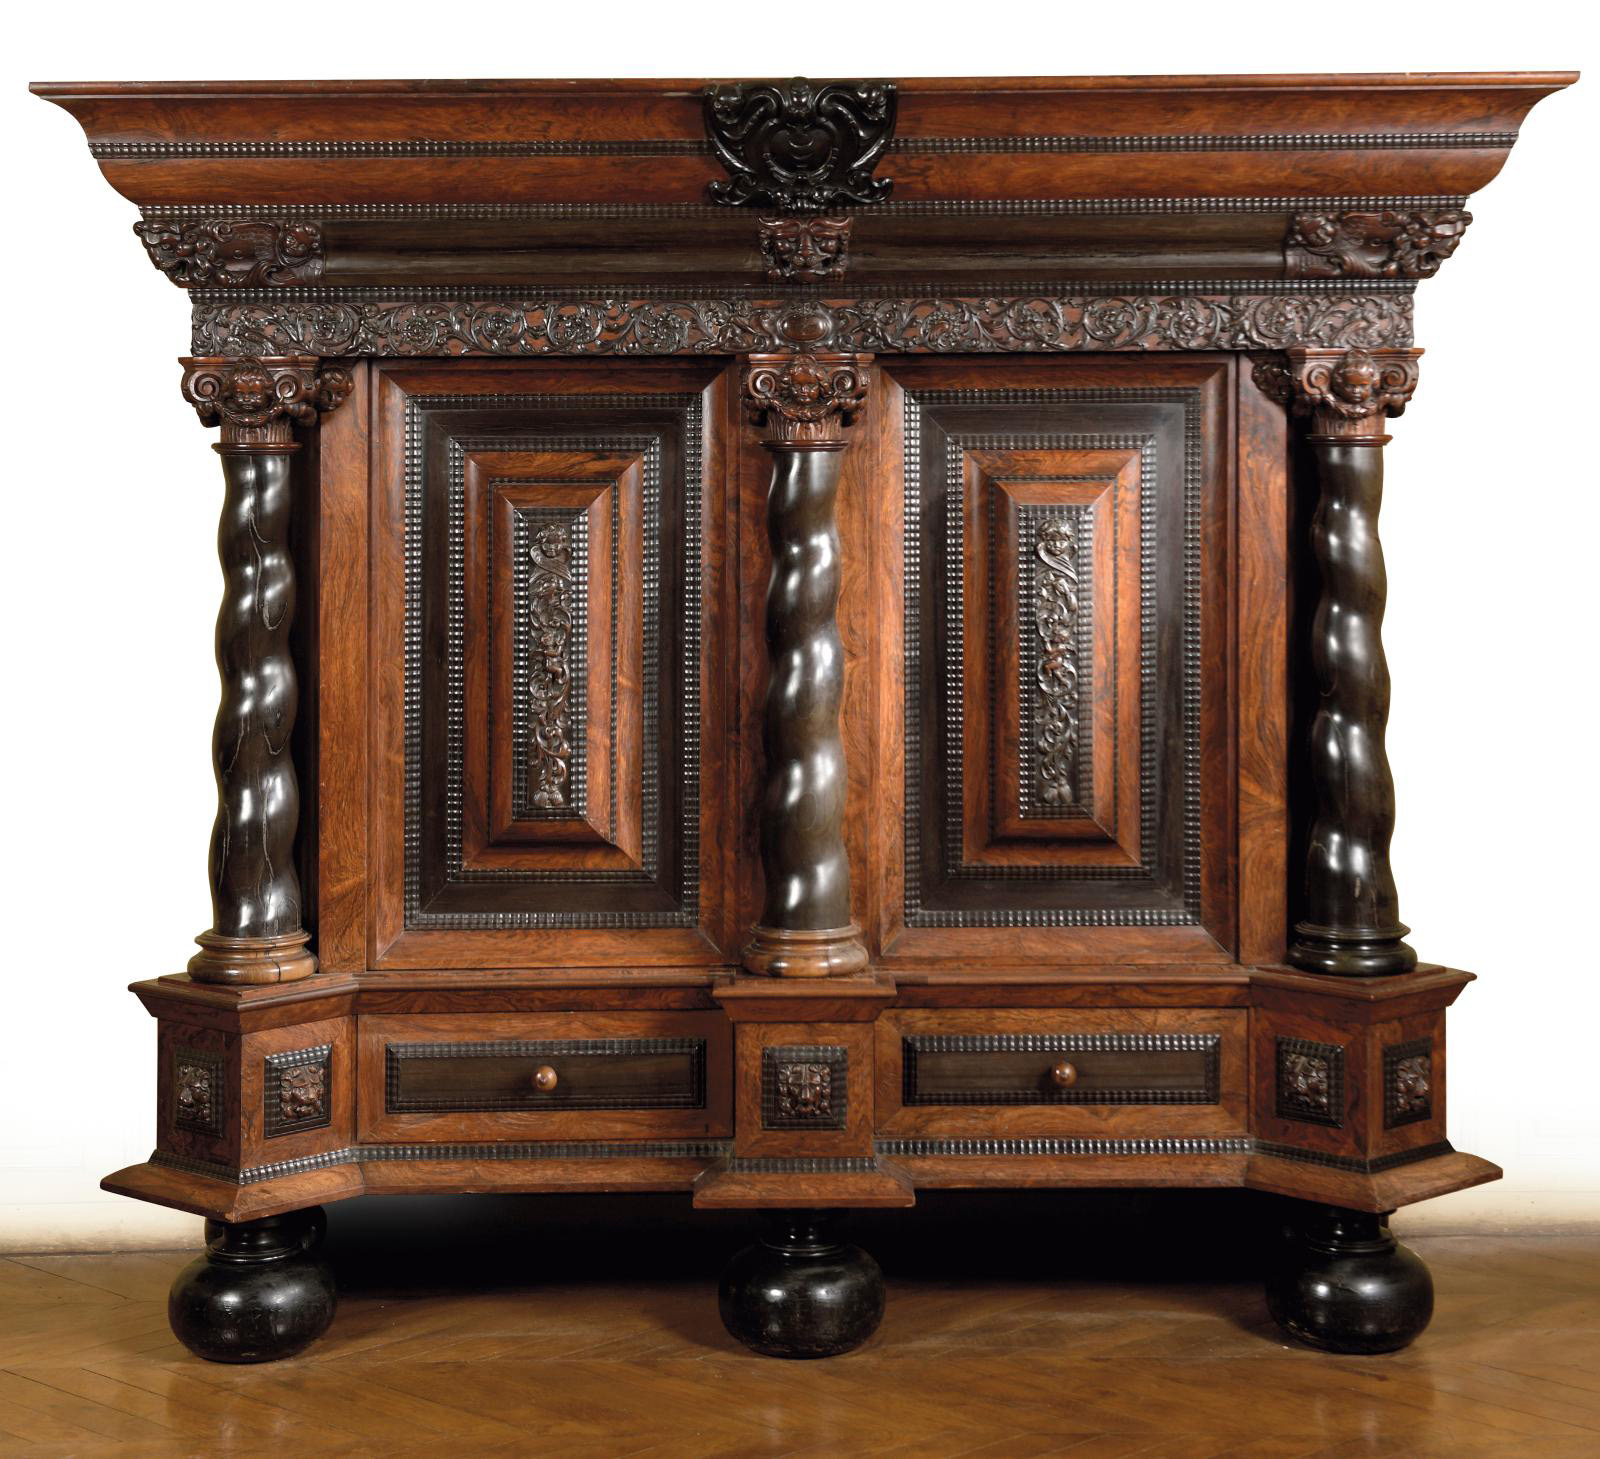 Dutch work, 17th century. Cabinet in rosewood with rosewood and ebony veneer decorated with masks and foliage, twisted columns, spherical 